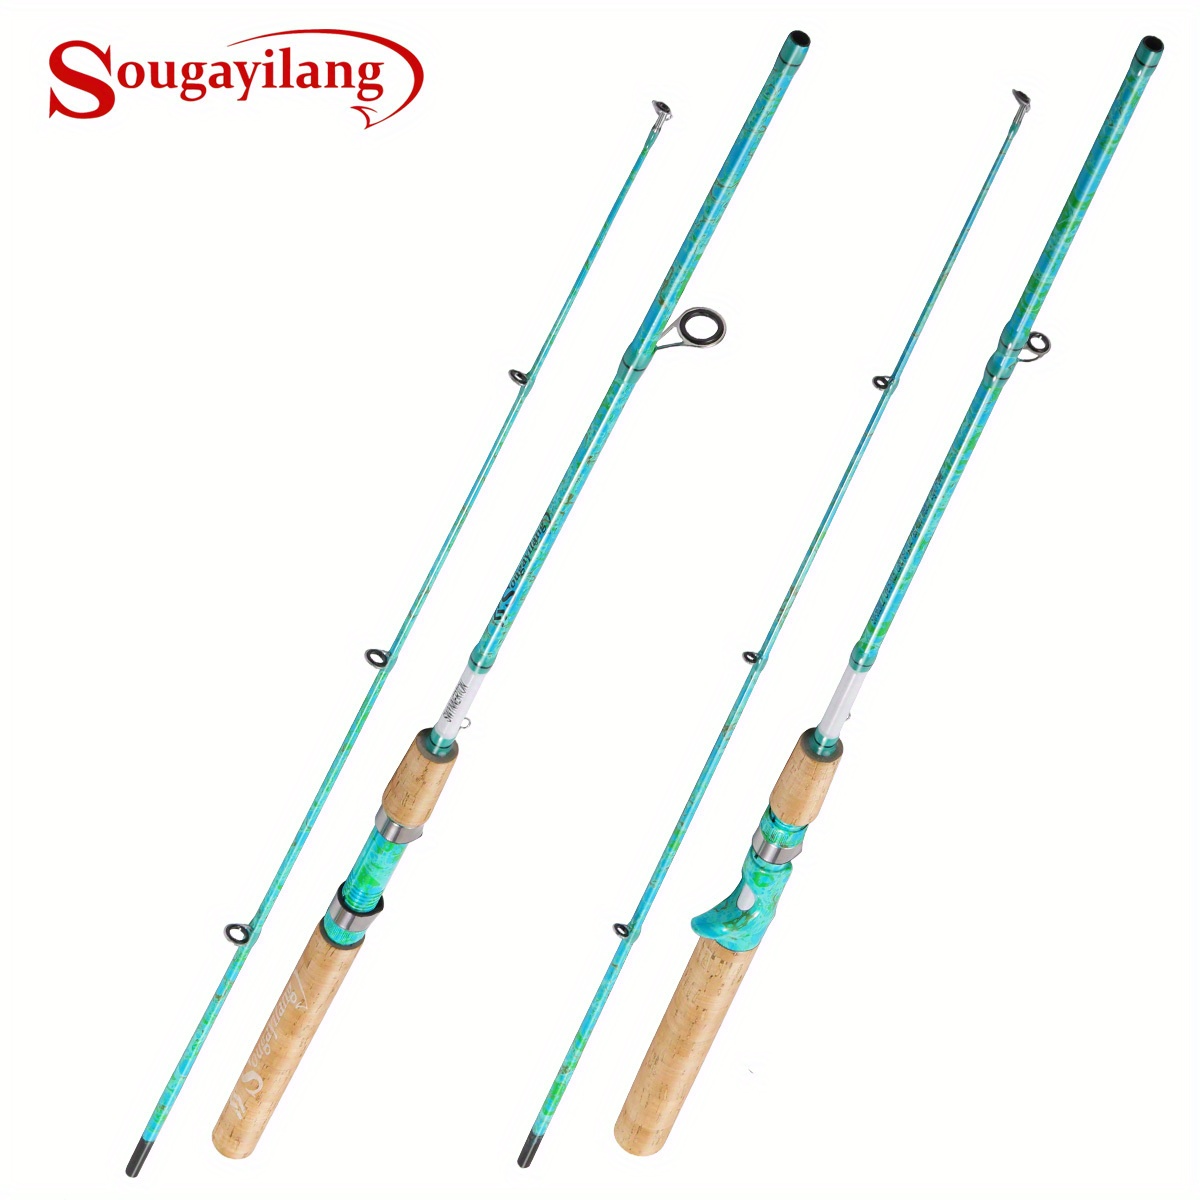 Sougayilang Fishing Rod and Reel Combo, Medium Fishing Pole with Spinning  Reel, Baitcaster Combo, SuperPolymer Handle-6ft with Left Handle Reel,  Spinning Combos -  Canada